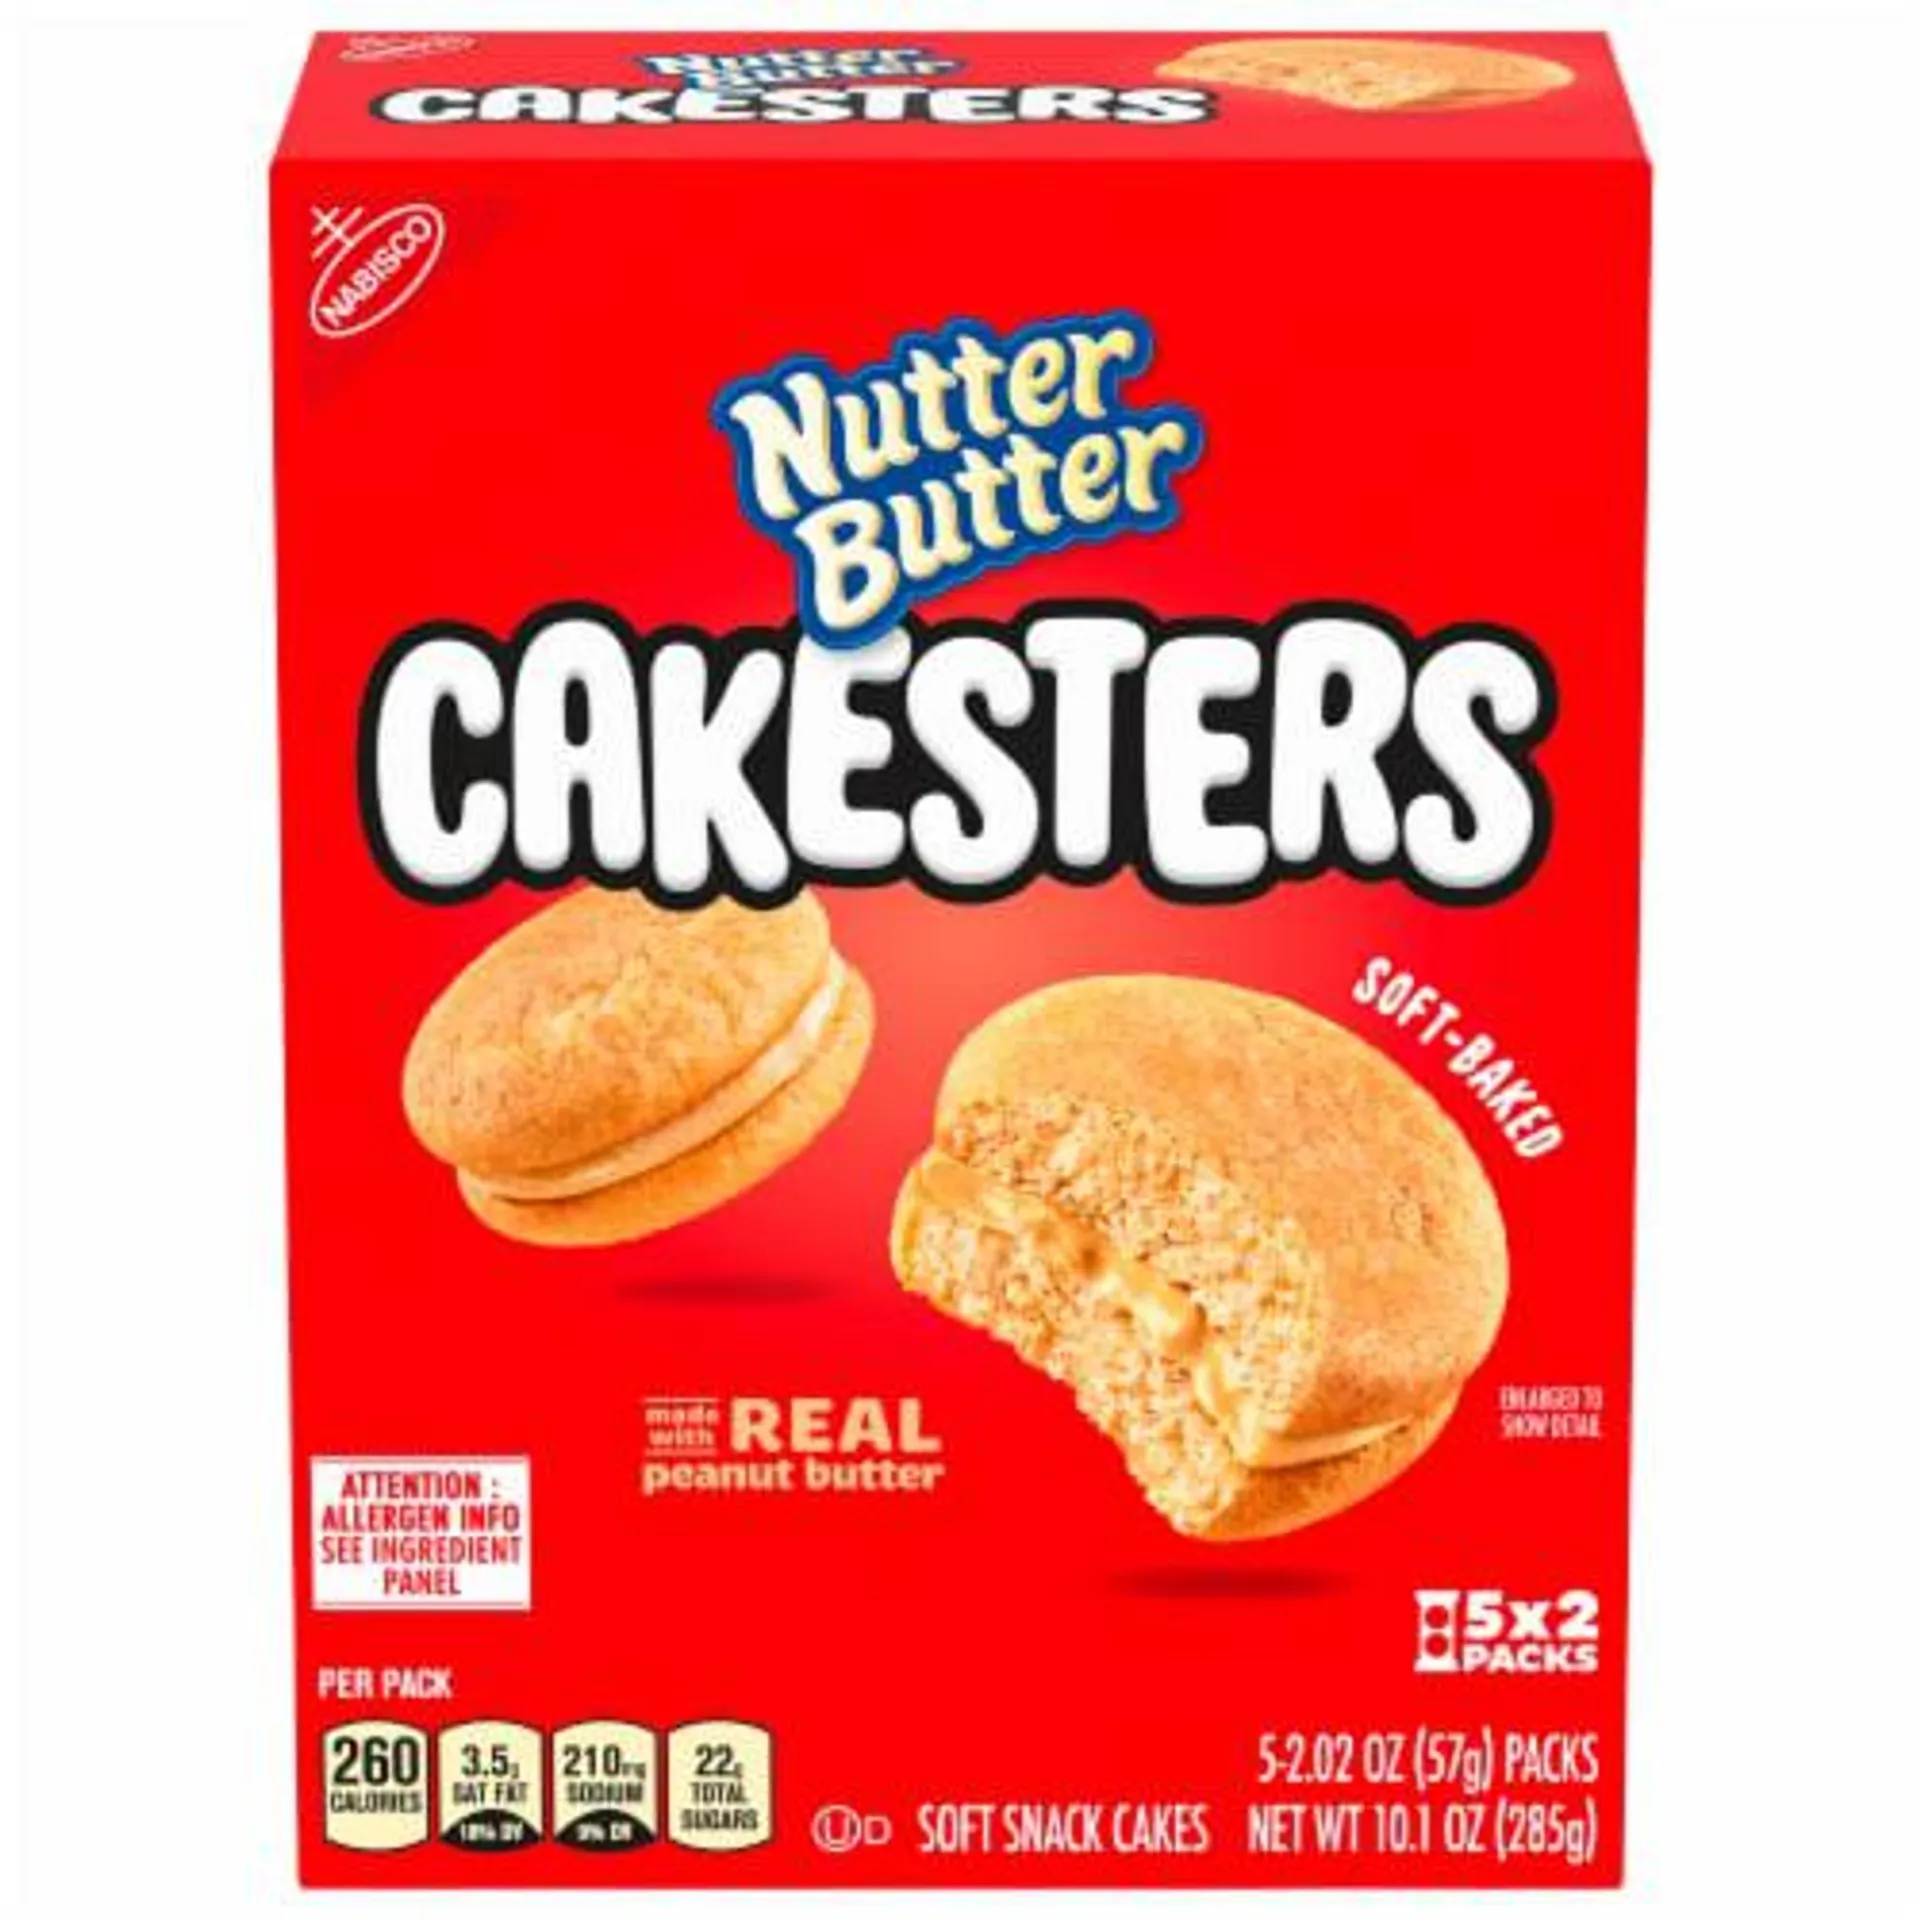 Nutter Butter Cakesters Cookies